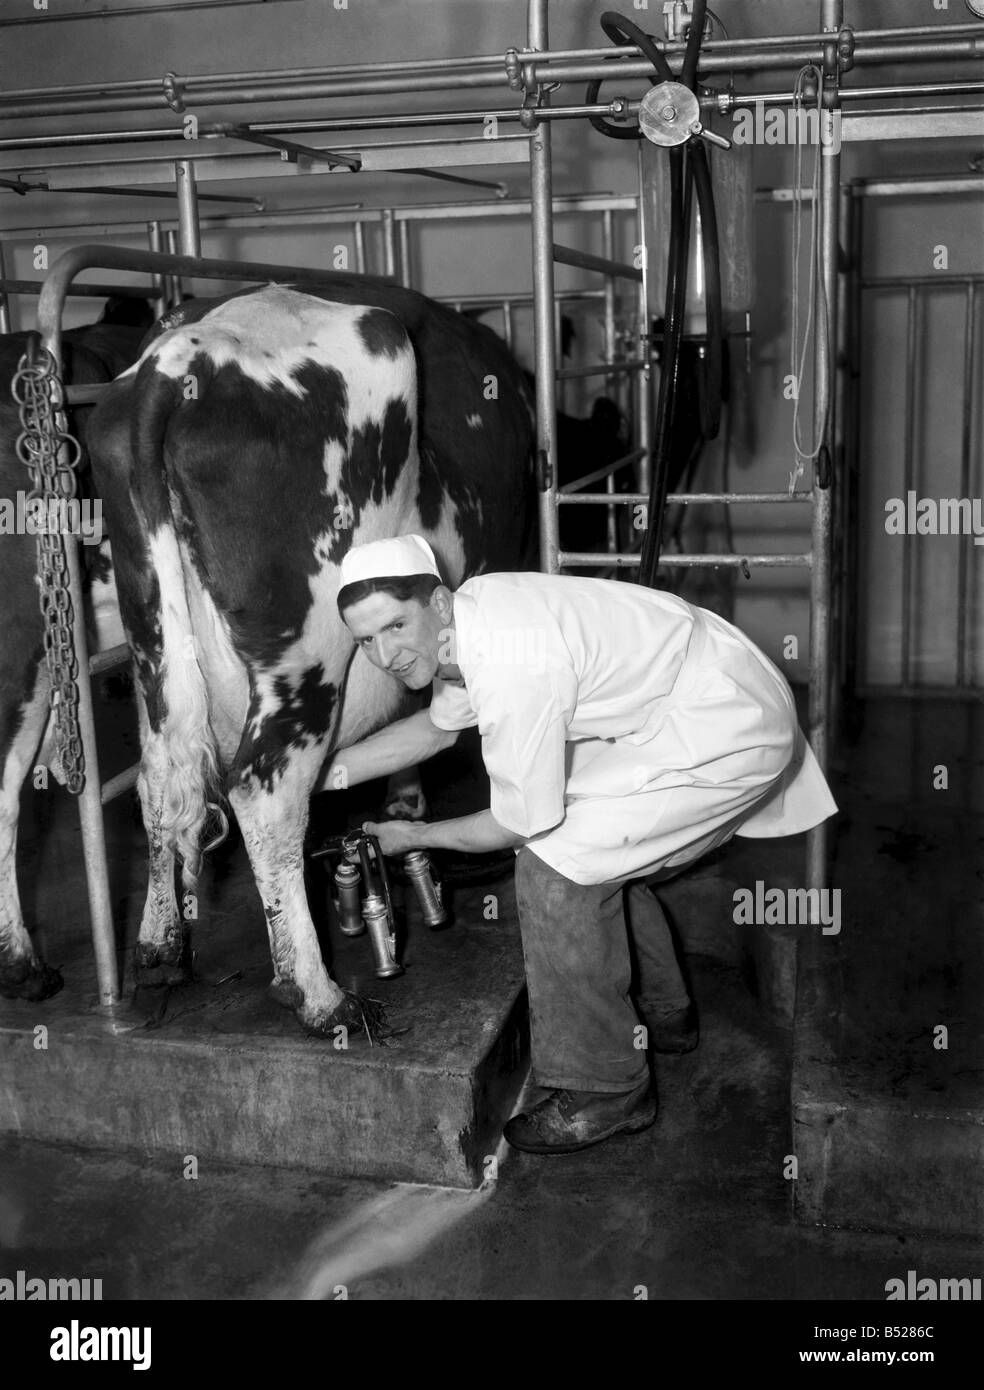 Herdsman David Worsley seen here in the milking parlour milking a cow. April 1953 D2109 Stock Photo